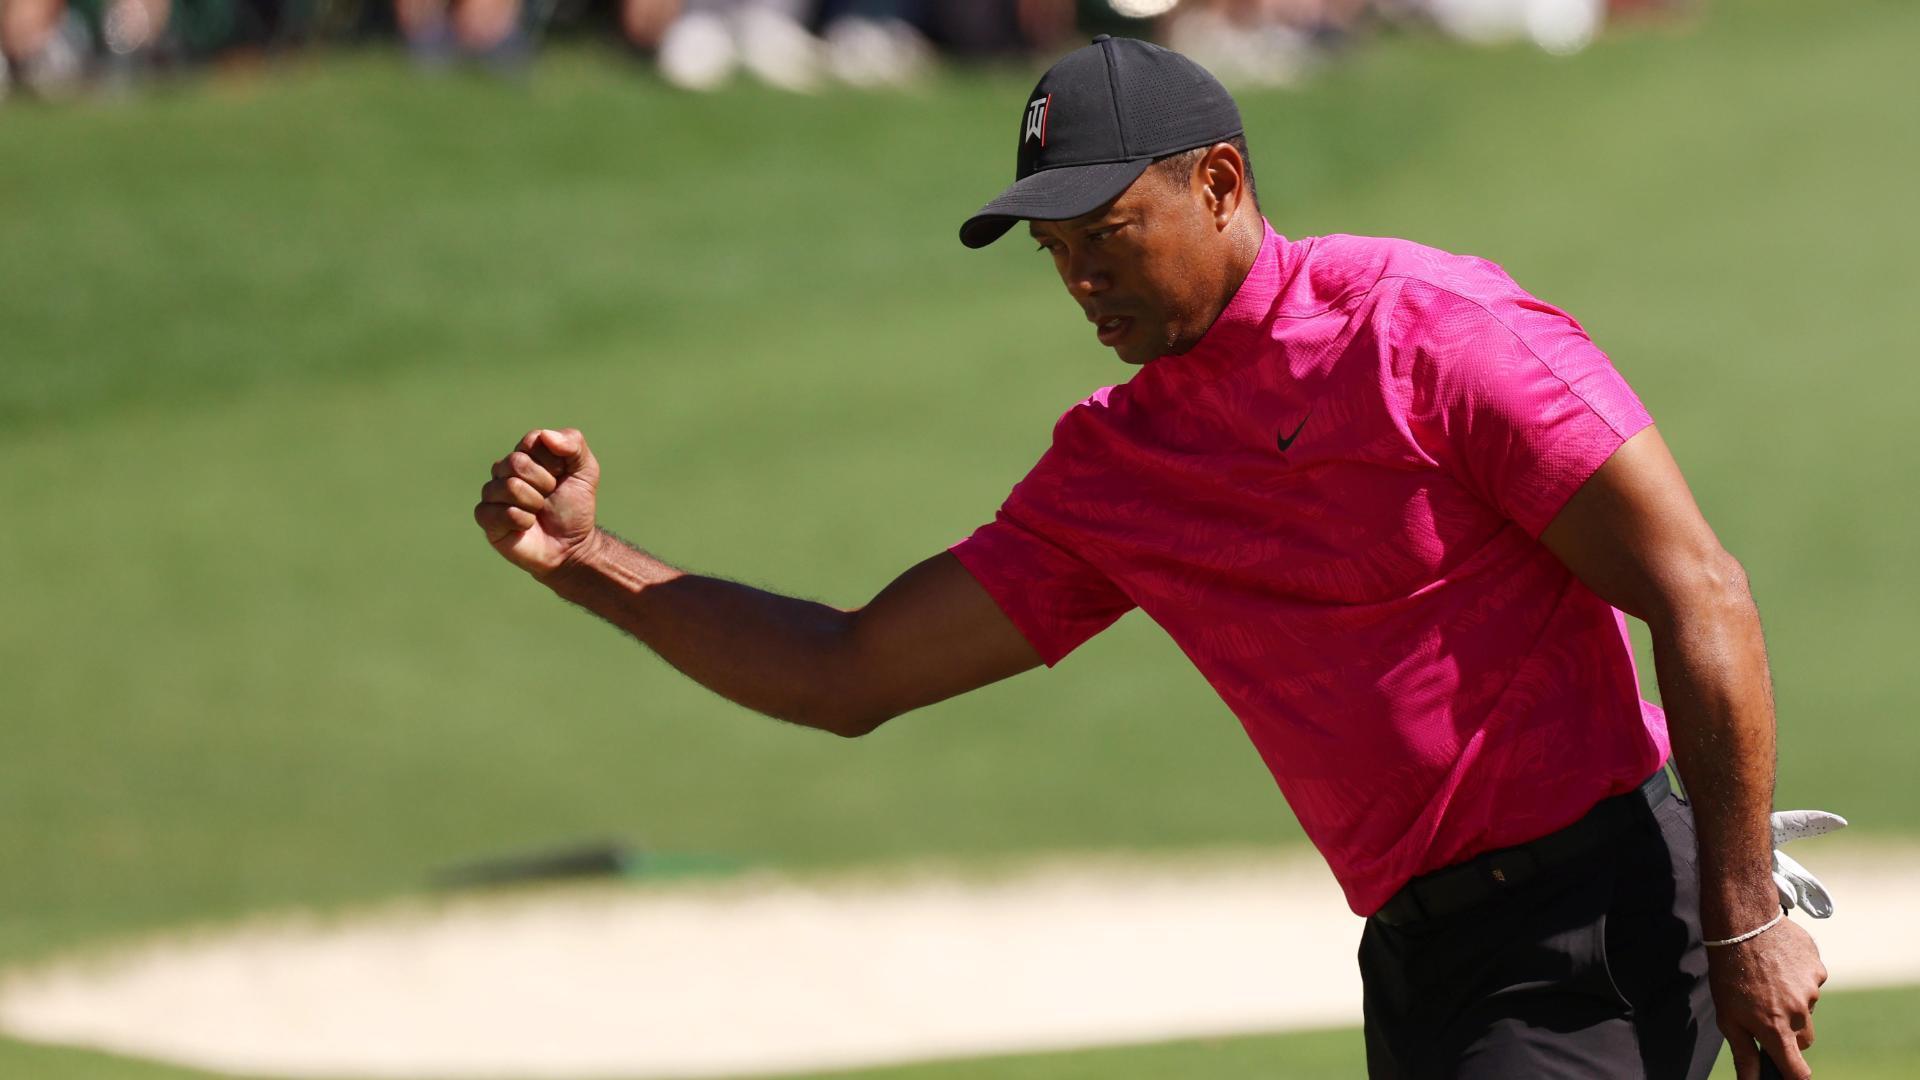 Tiger with a classic fist pump after long birdie putt - Stream the Video